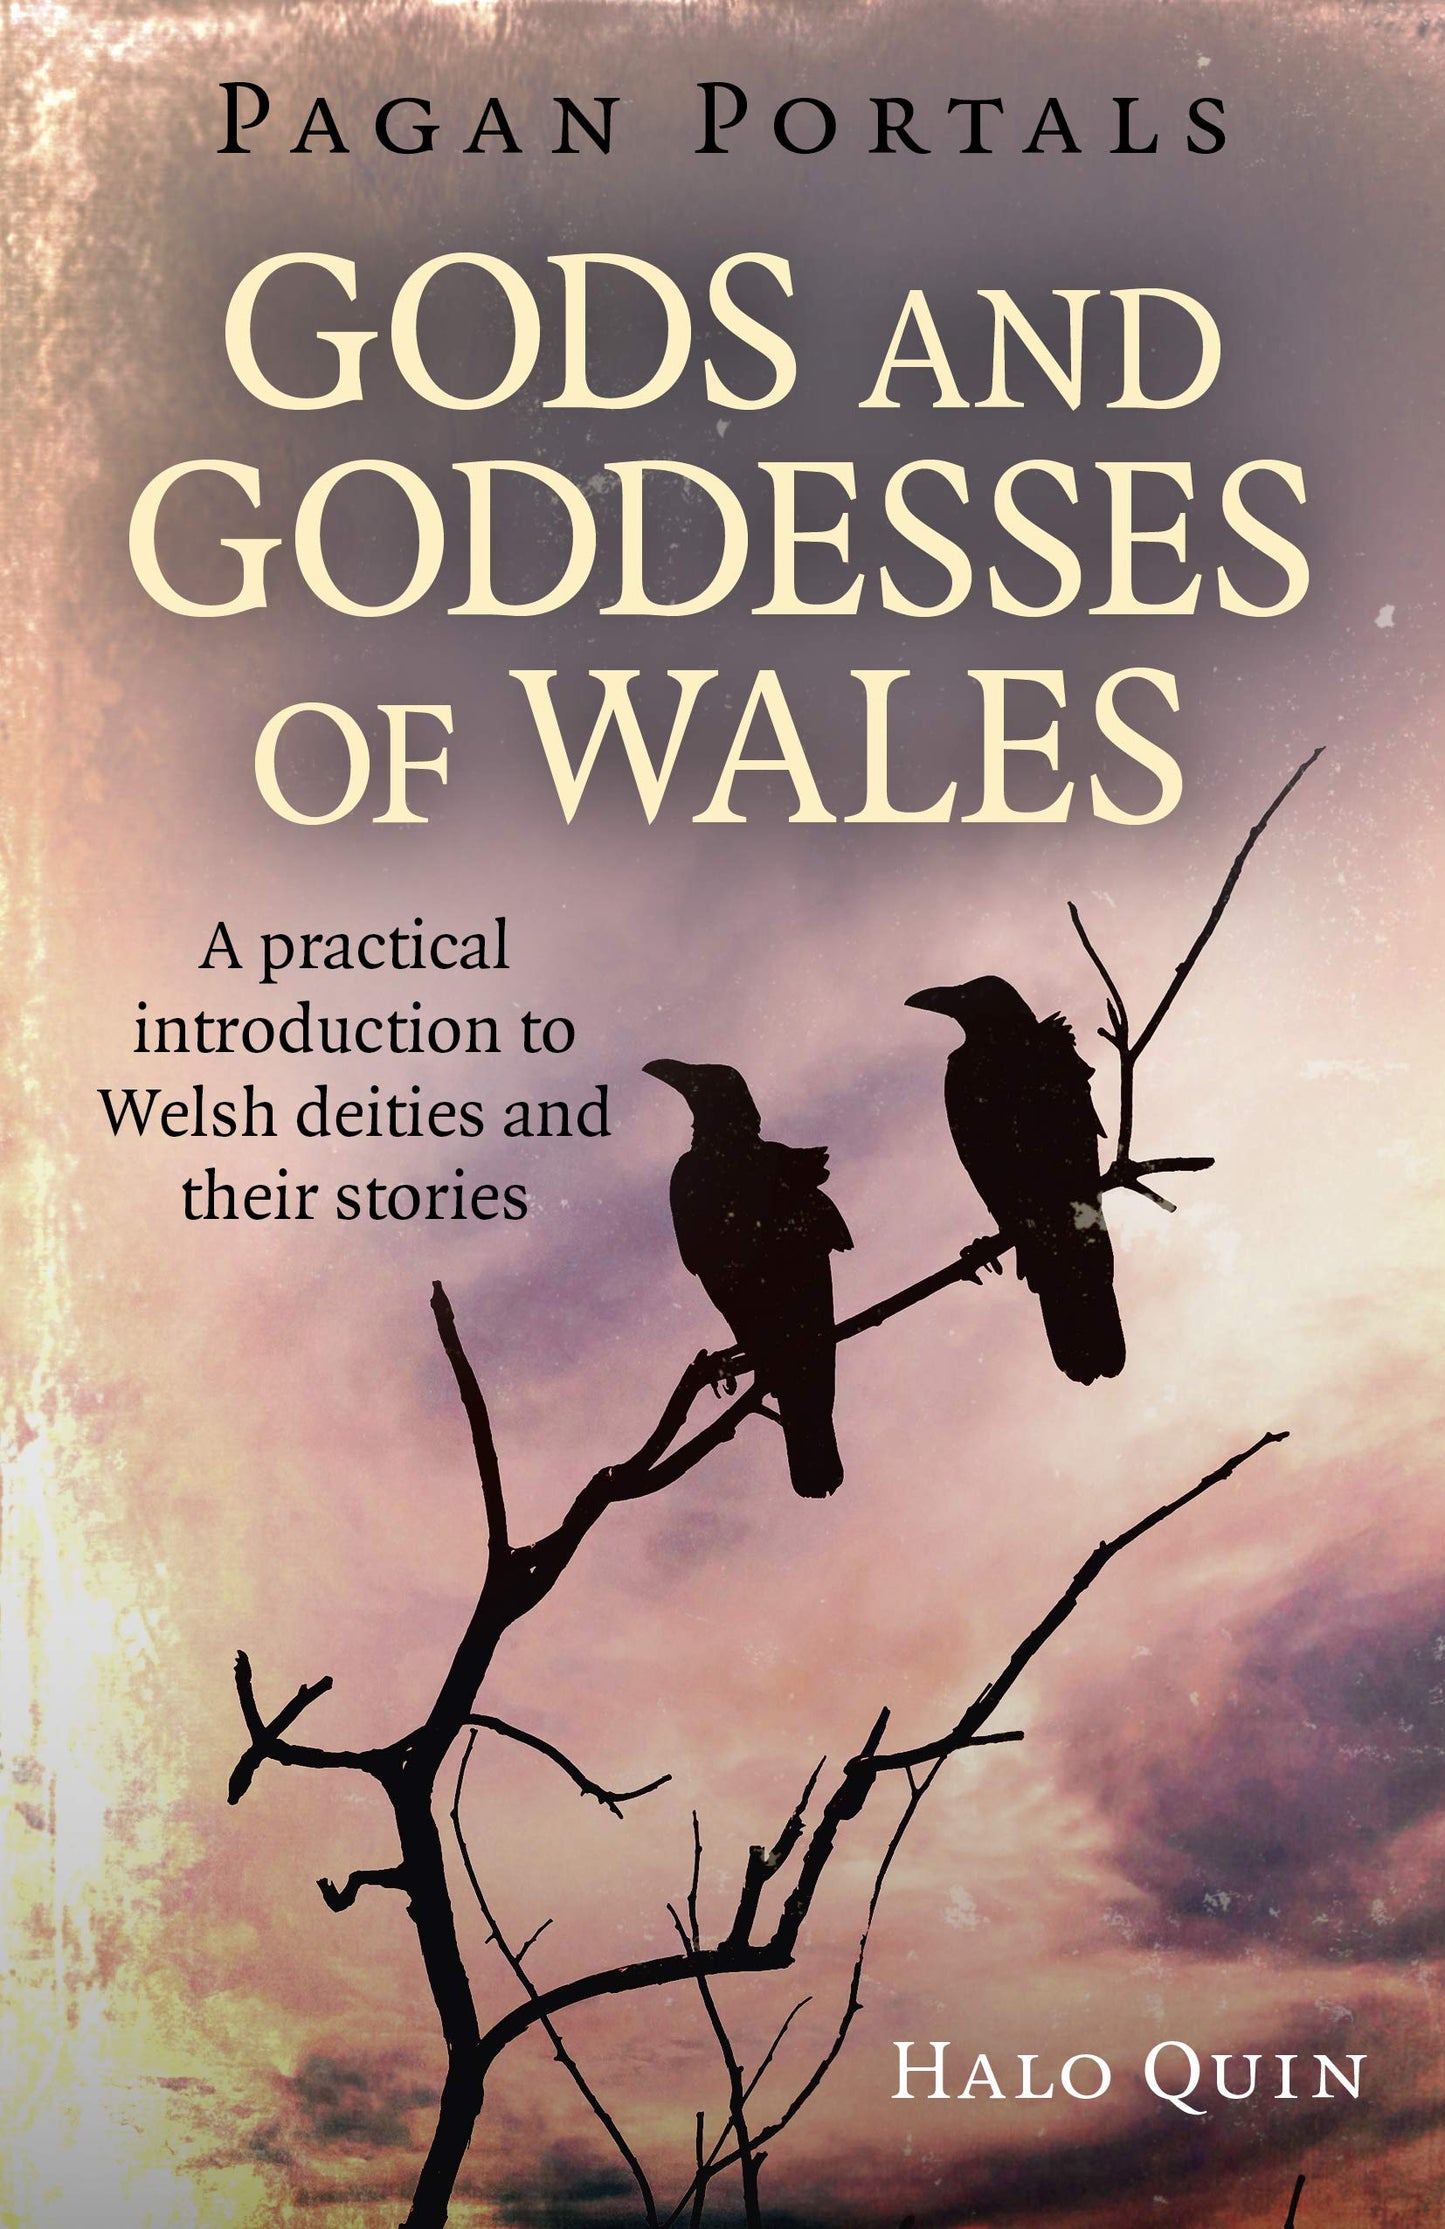 Gods and Goddesses of Wales by Halo Quin